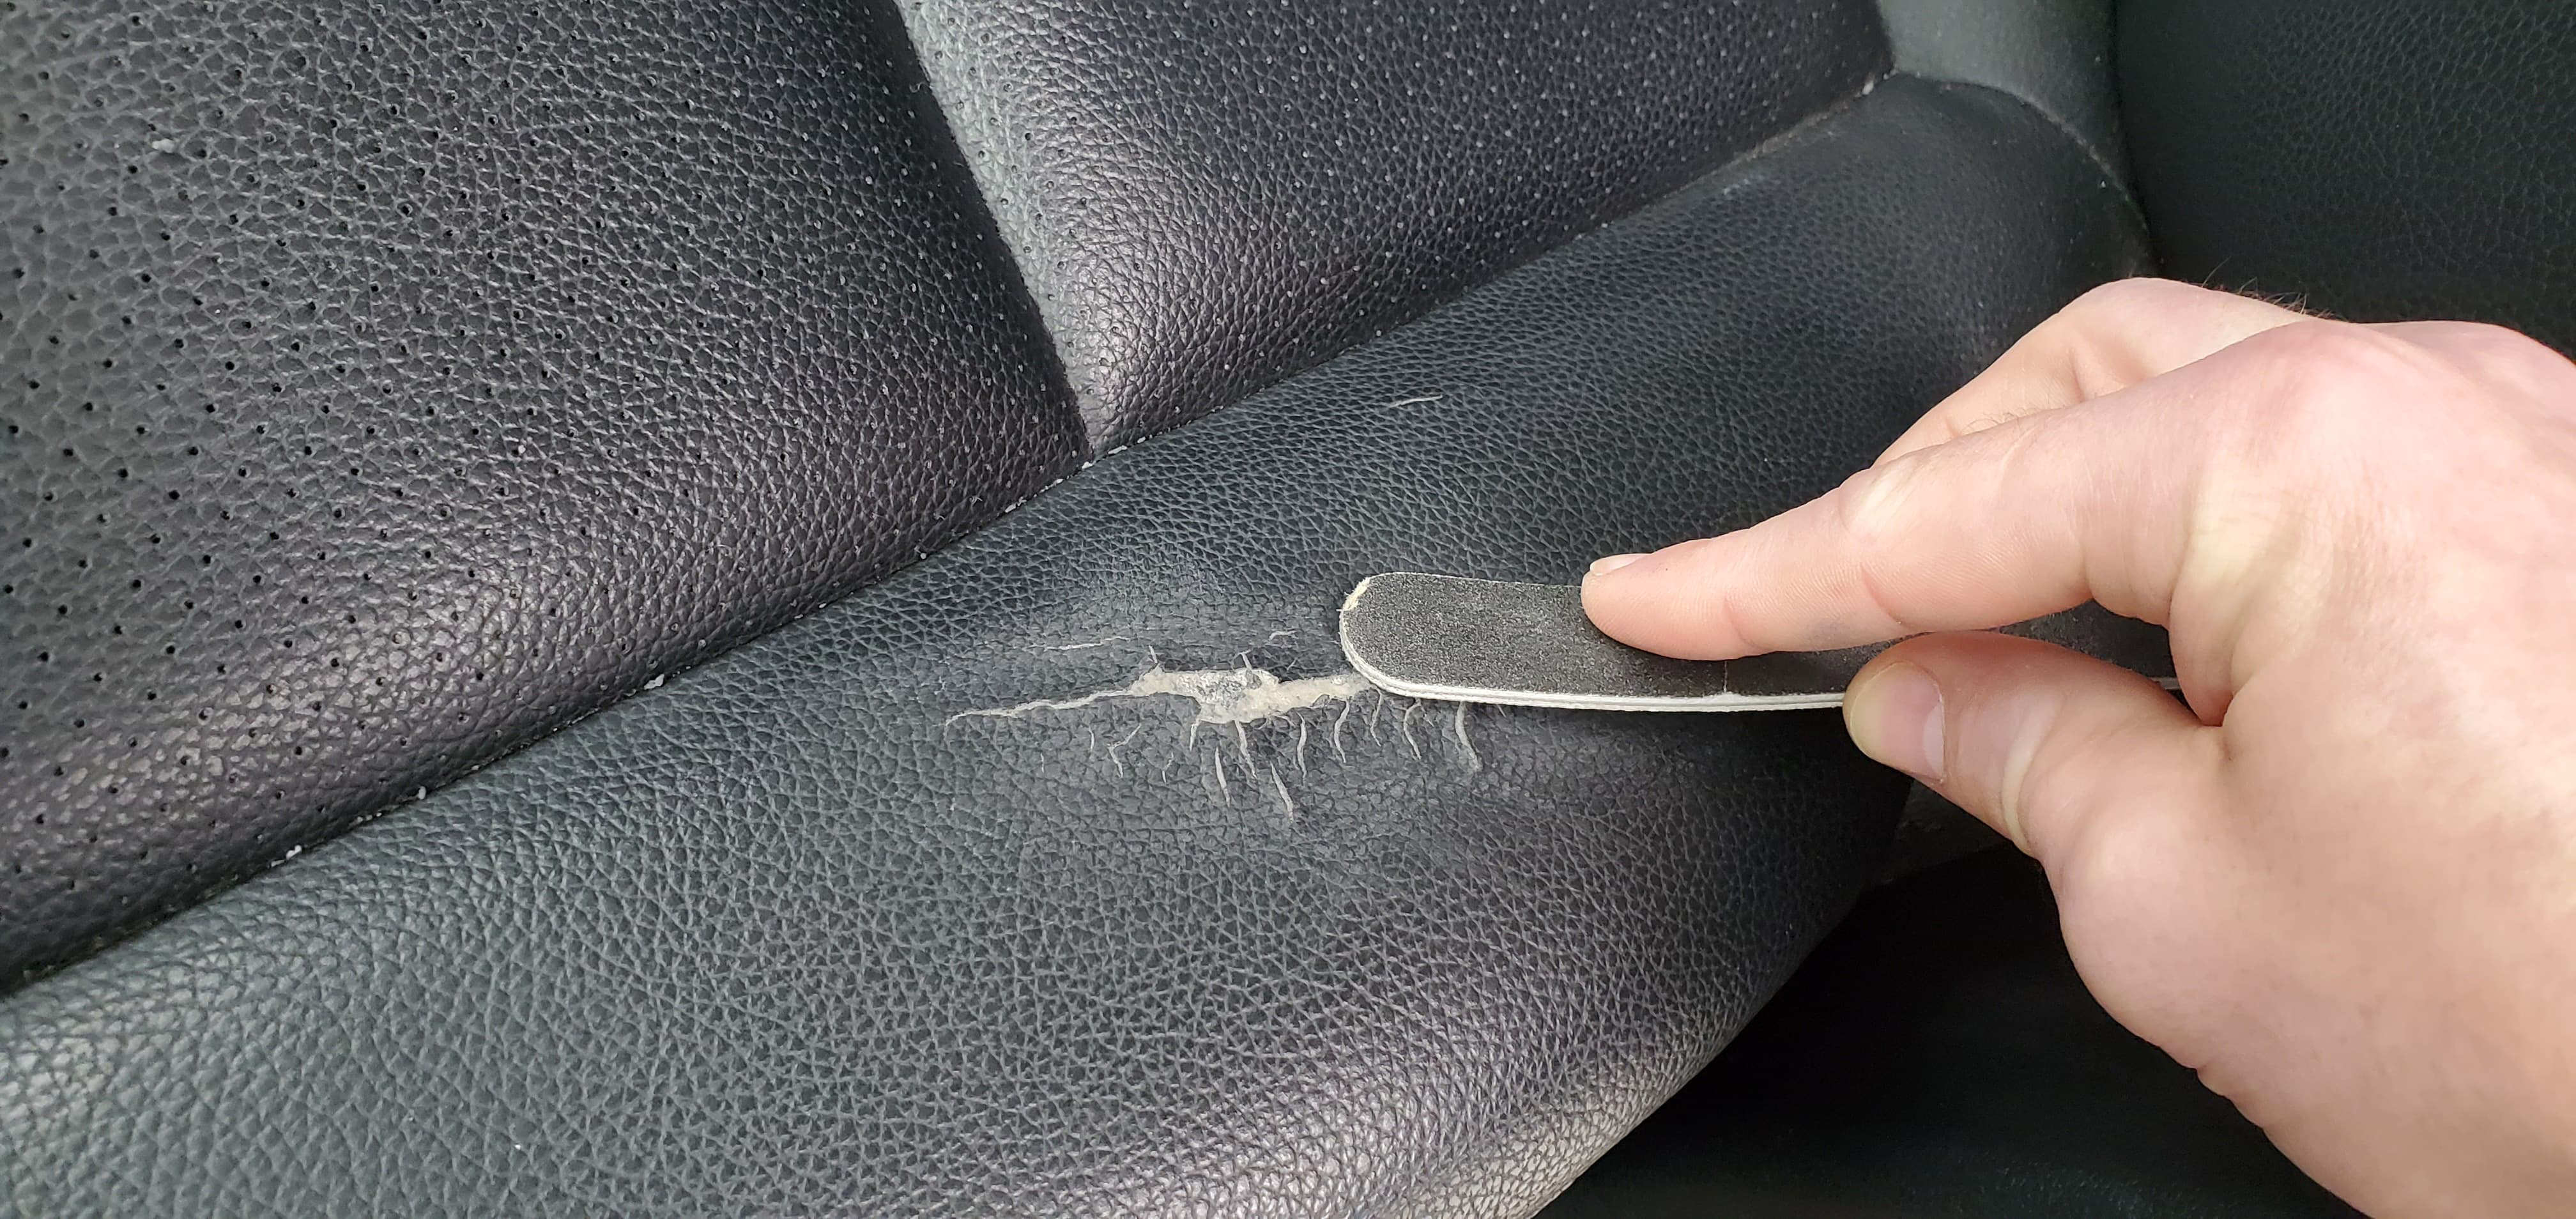 How To Repair A Leather Car Seat - How To Repair Rip In Leather Car Seat